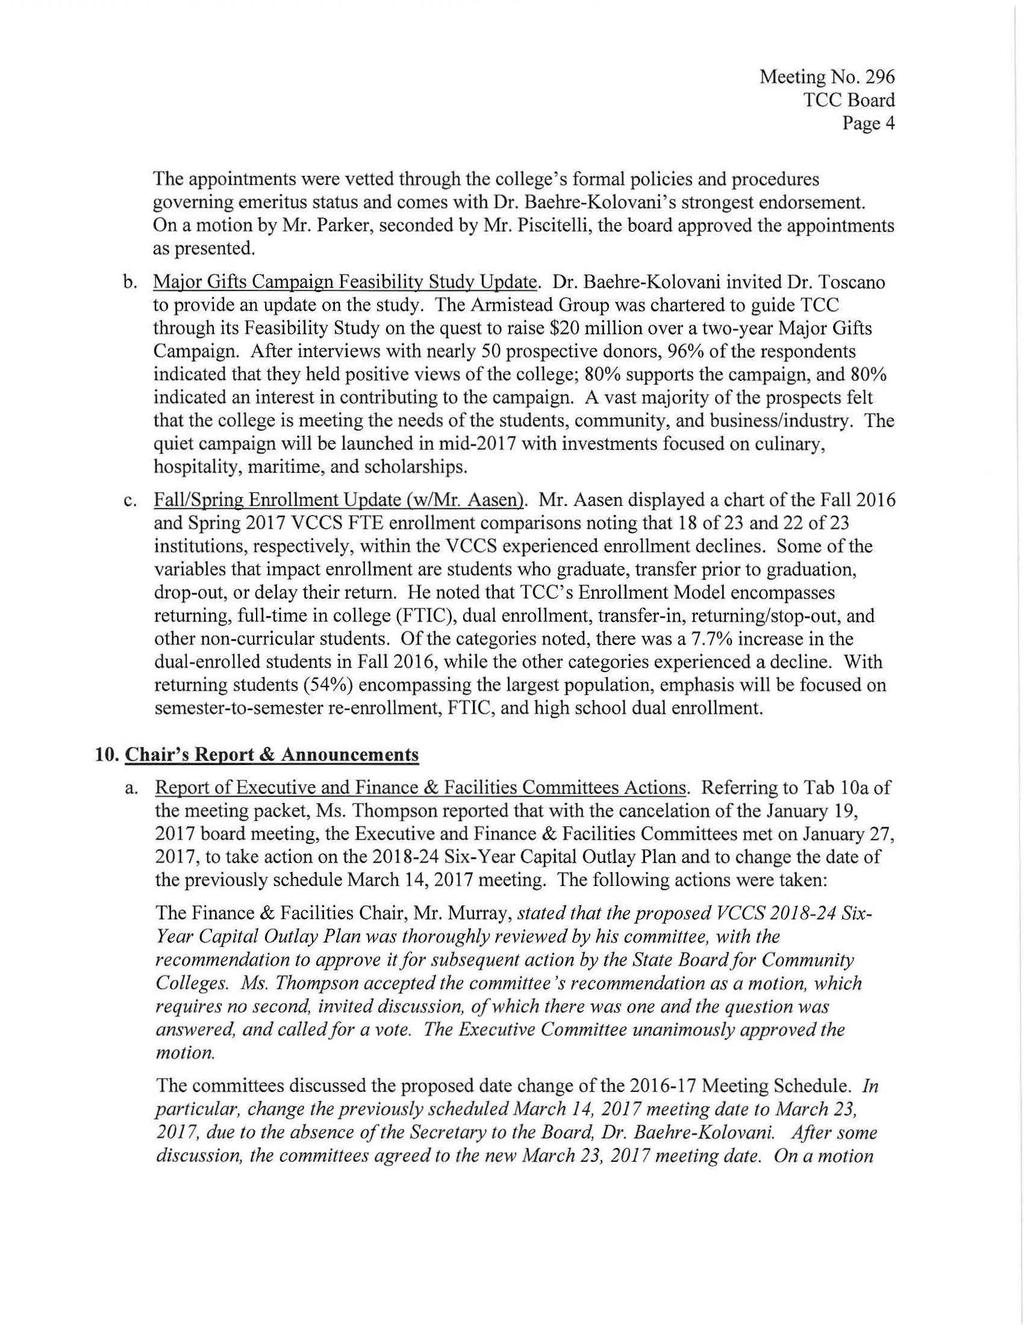 Meeting No. 296 TCC Board Page4 The appointments were vetted through the college's formal policies and procedures governing emeritus status and comes with Dr. Baehre-Kolovani's strongest endorsement.